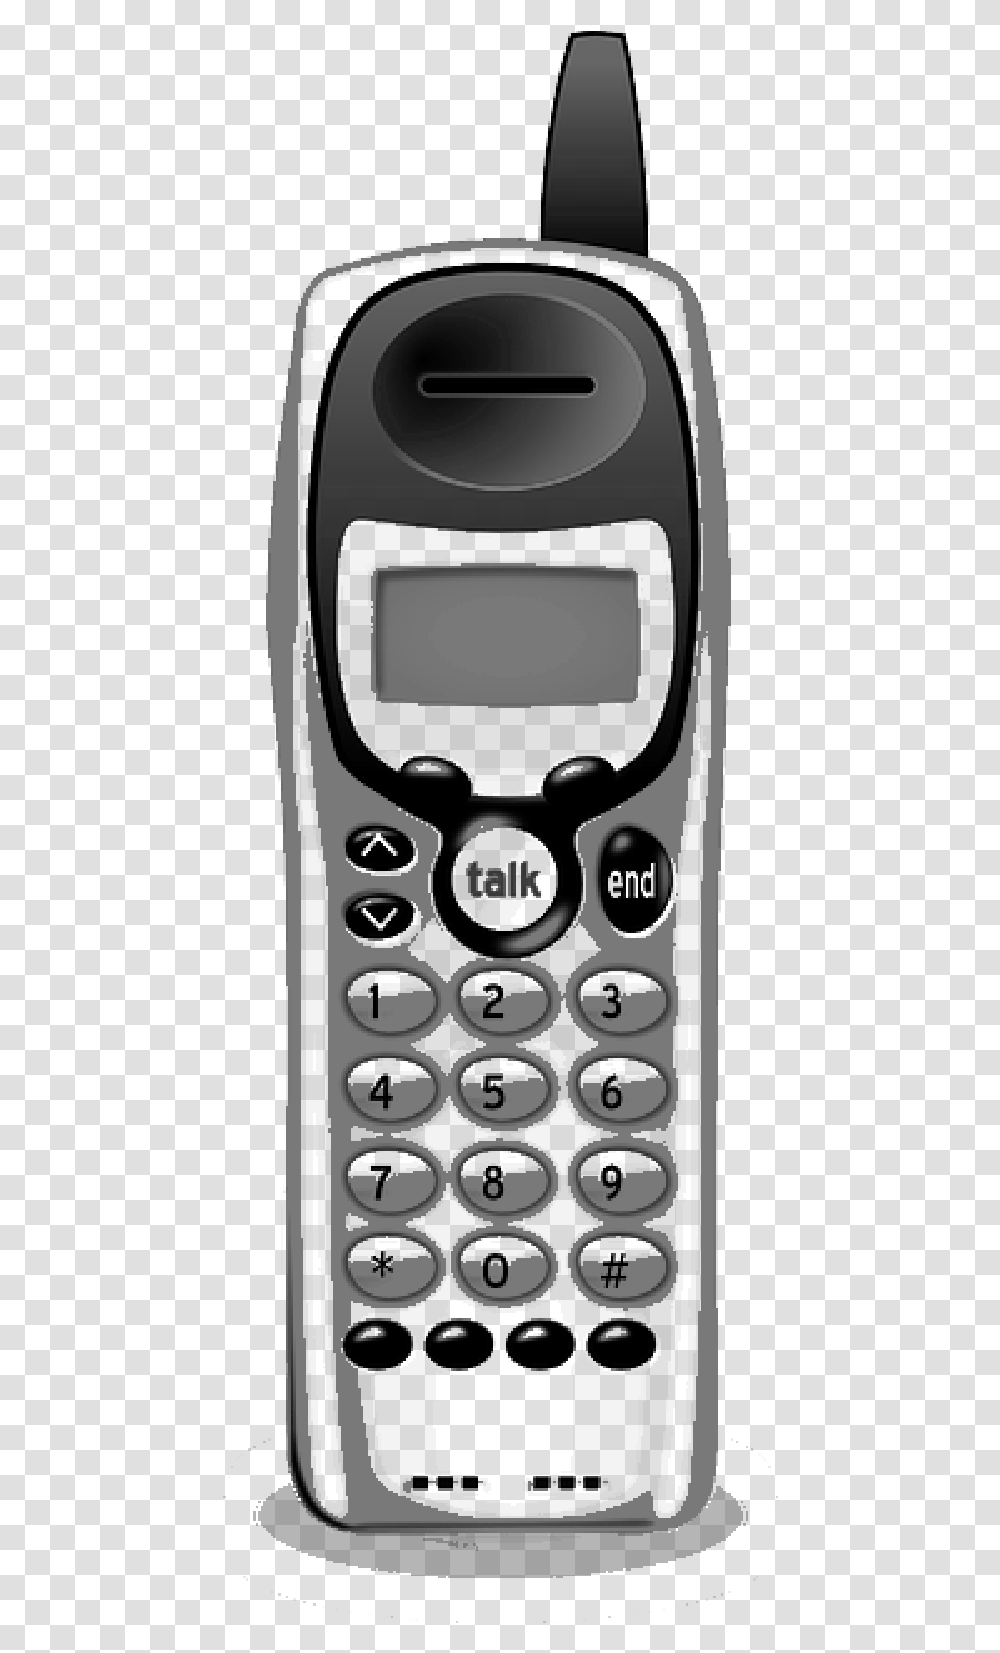 Cordless Telephone Telephones Used In Present, Electronics, Mobile Phone, Cell Phone Transparent Png